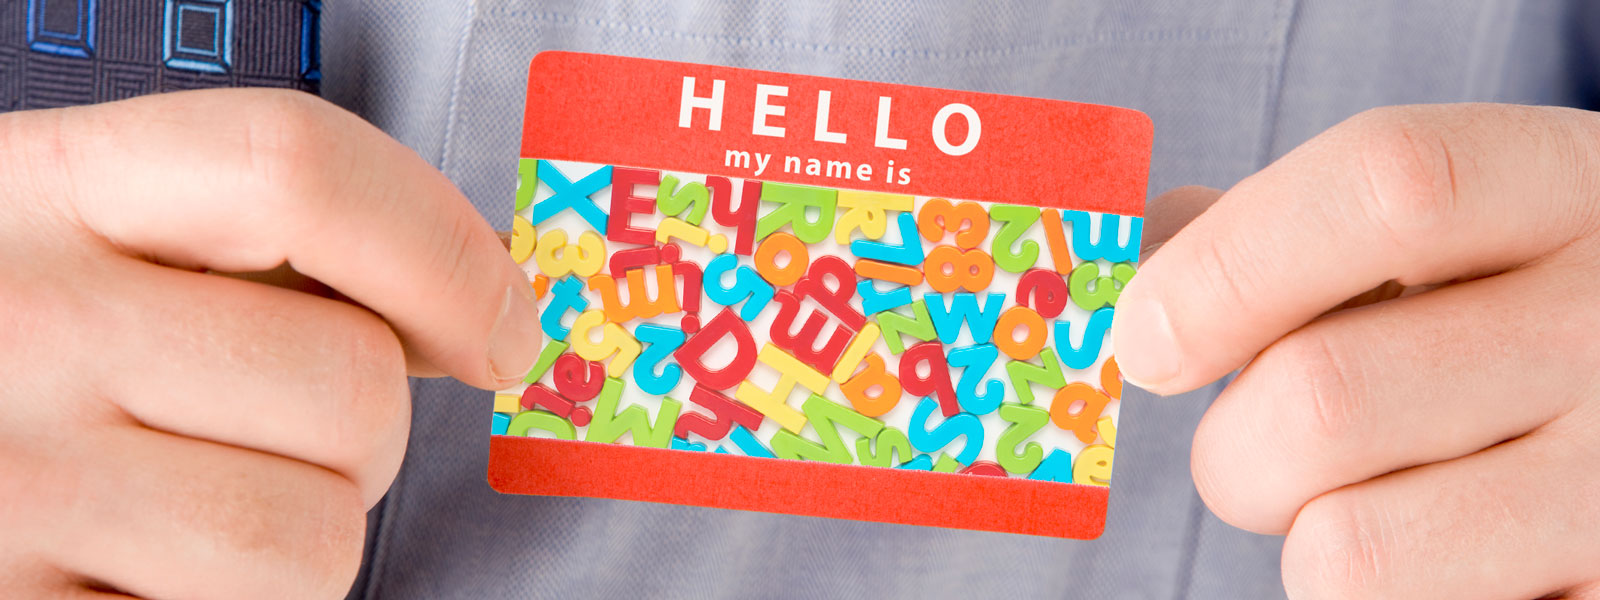 Hands hold a name tag containing a jumble of letters